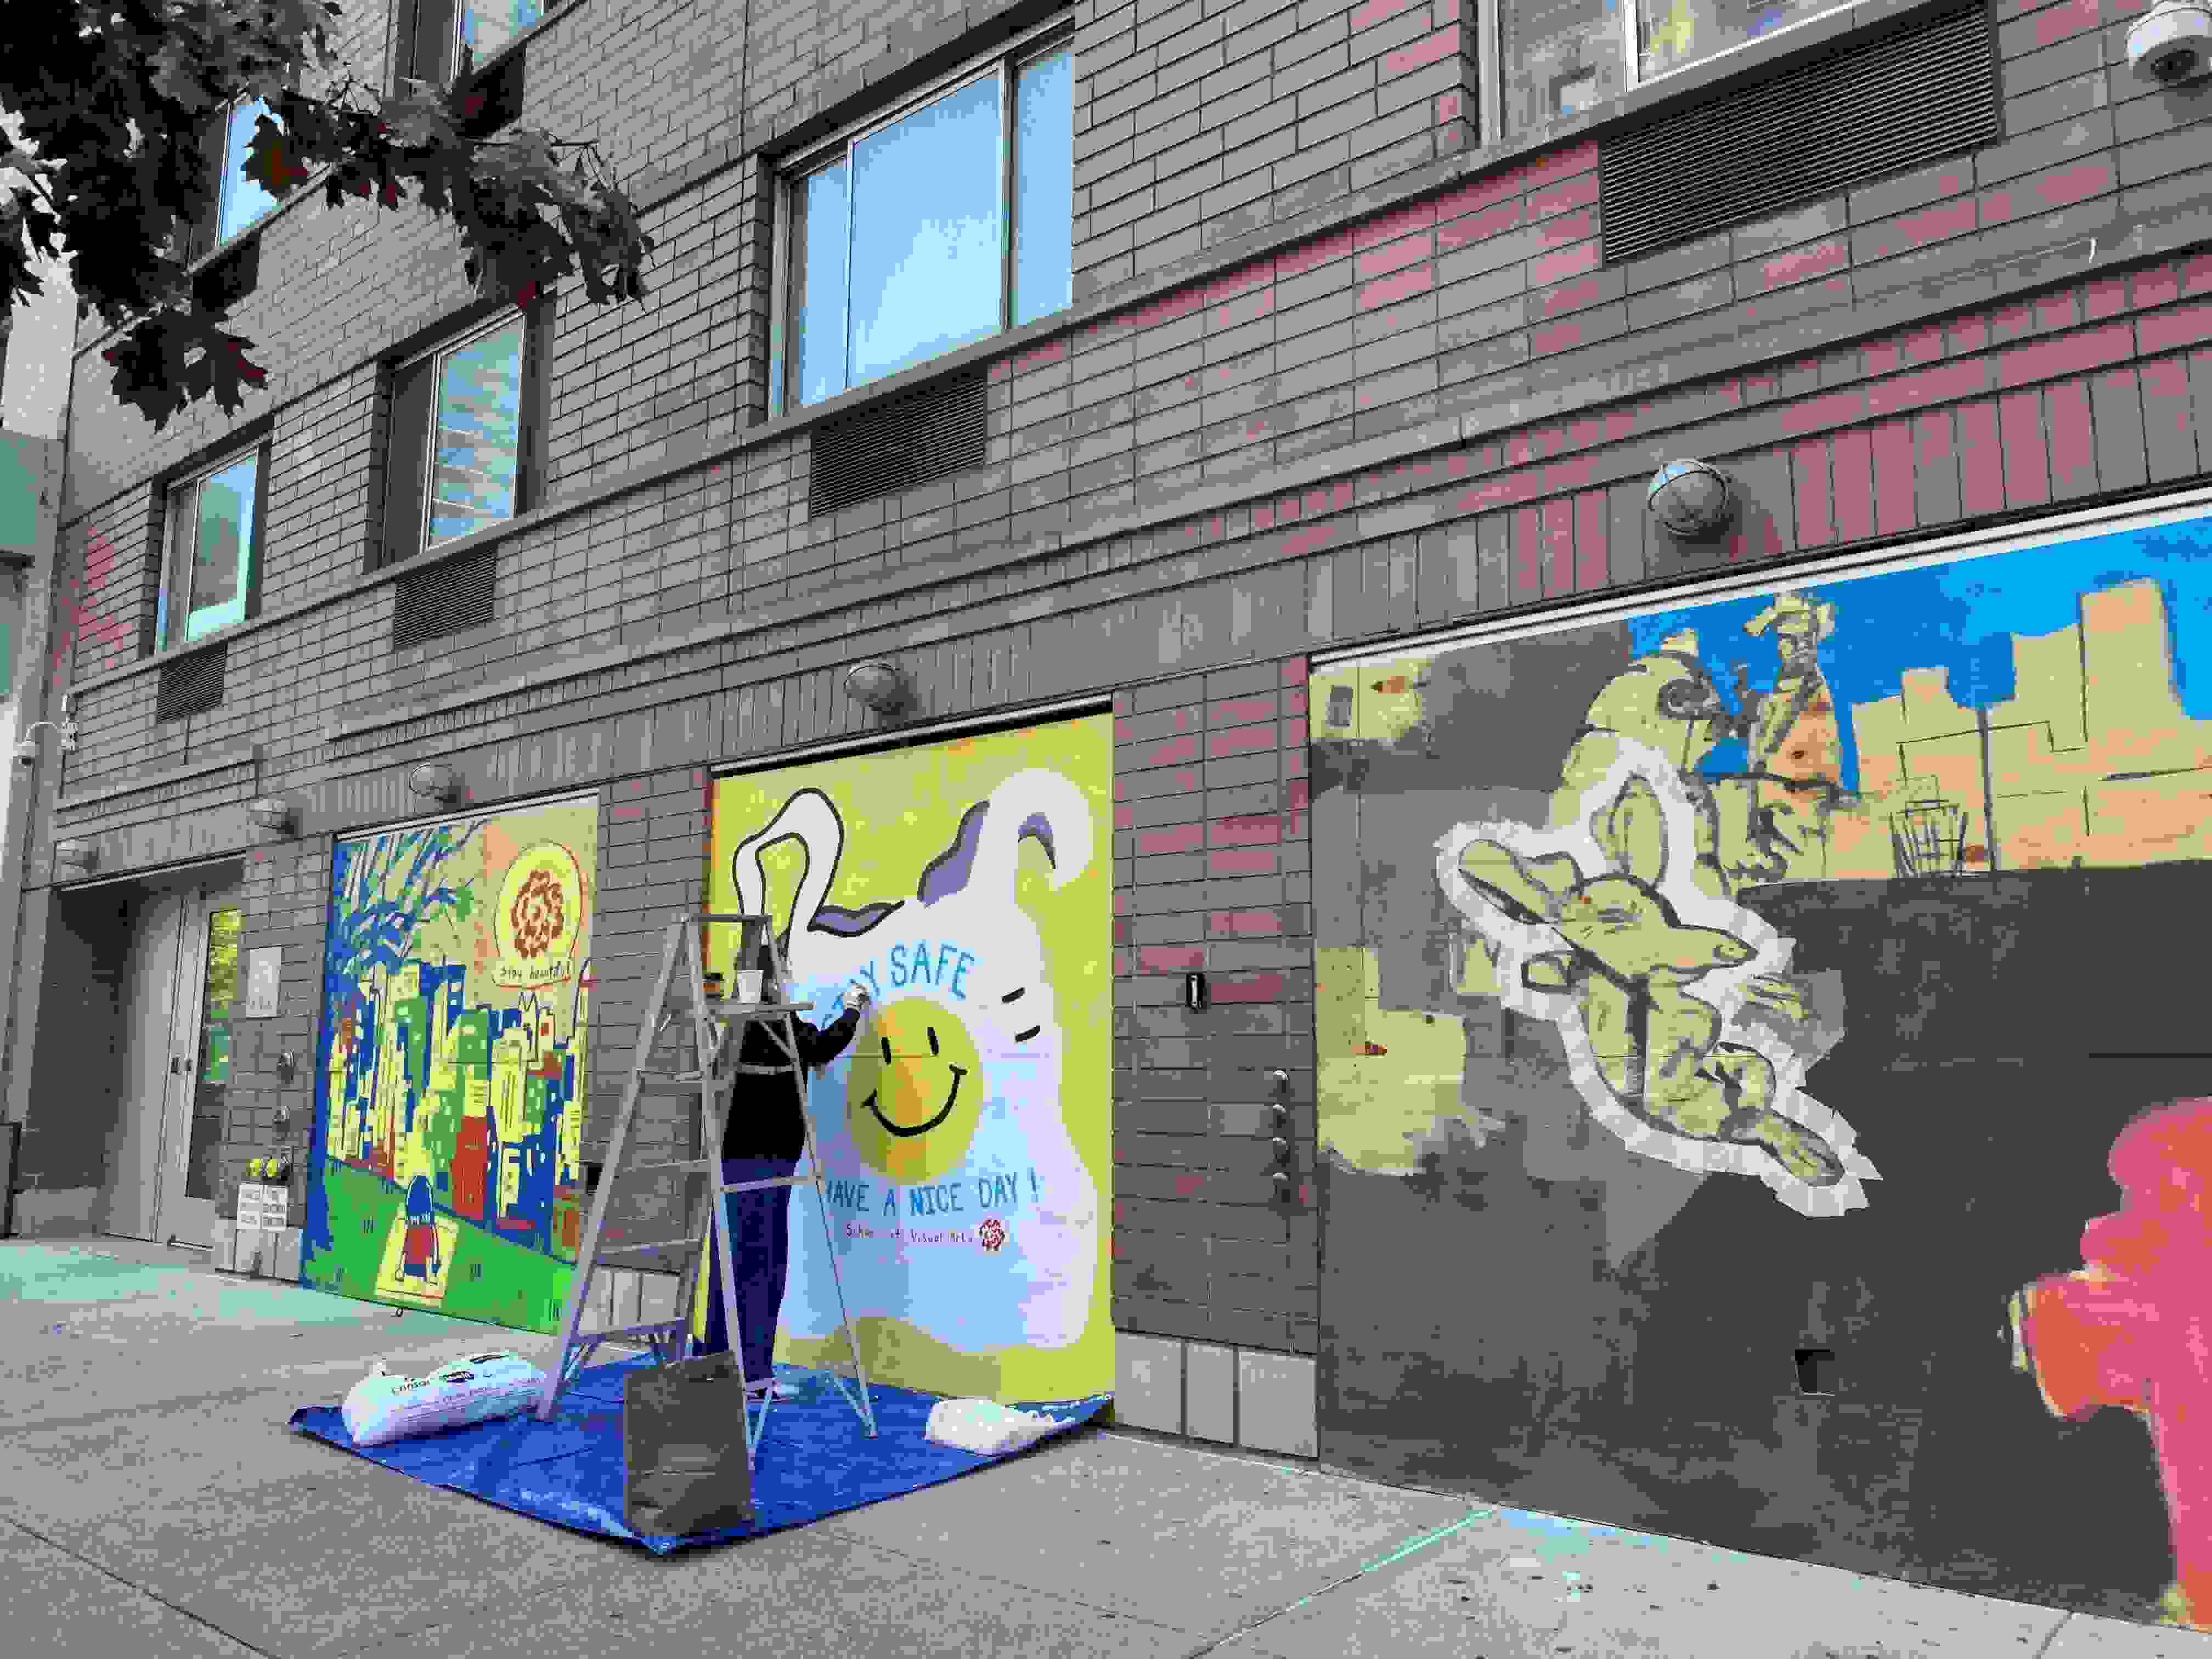 A photograph of a city building exterior, on which are three murals painted on plywood at the street level. A person is working on the middle mural.